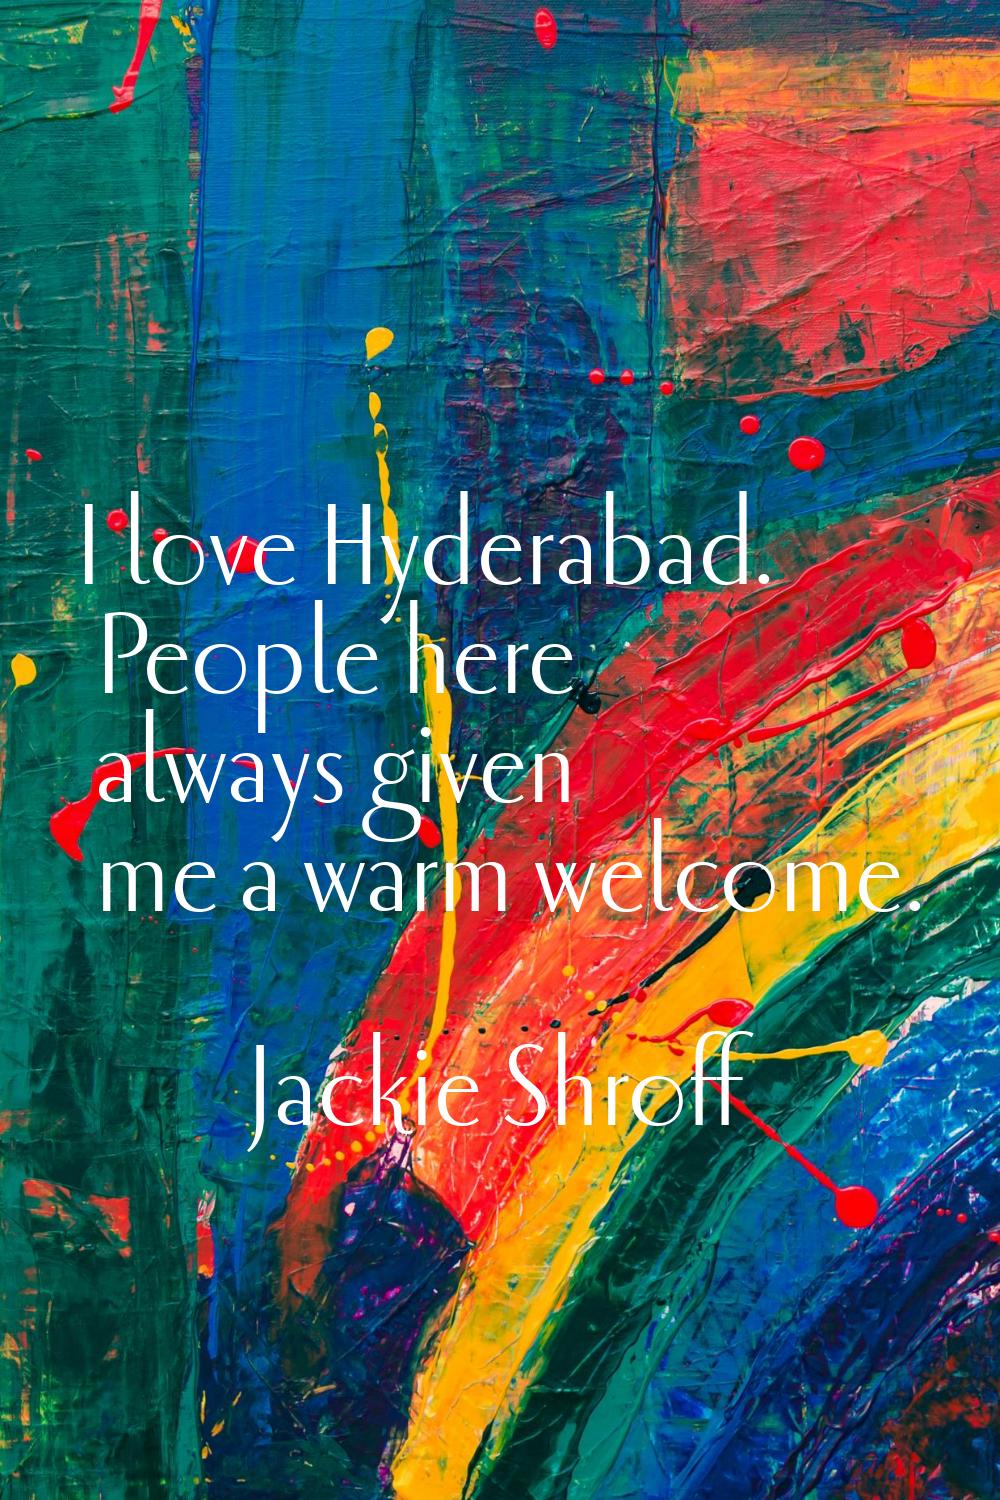 I love Hyderabad. People here always given me a warm welcome.